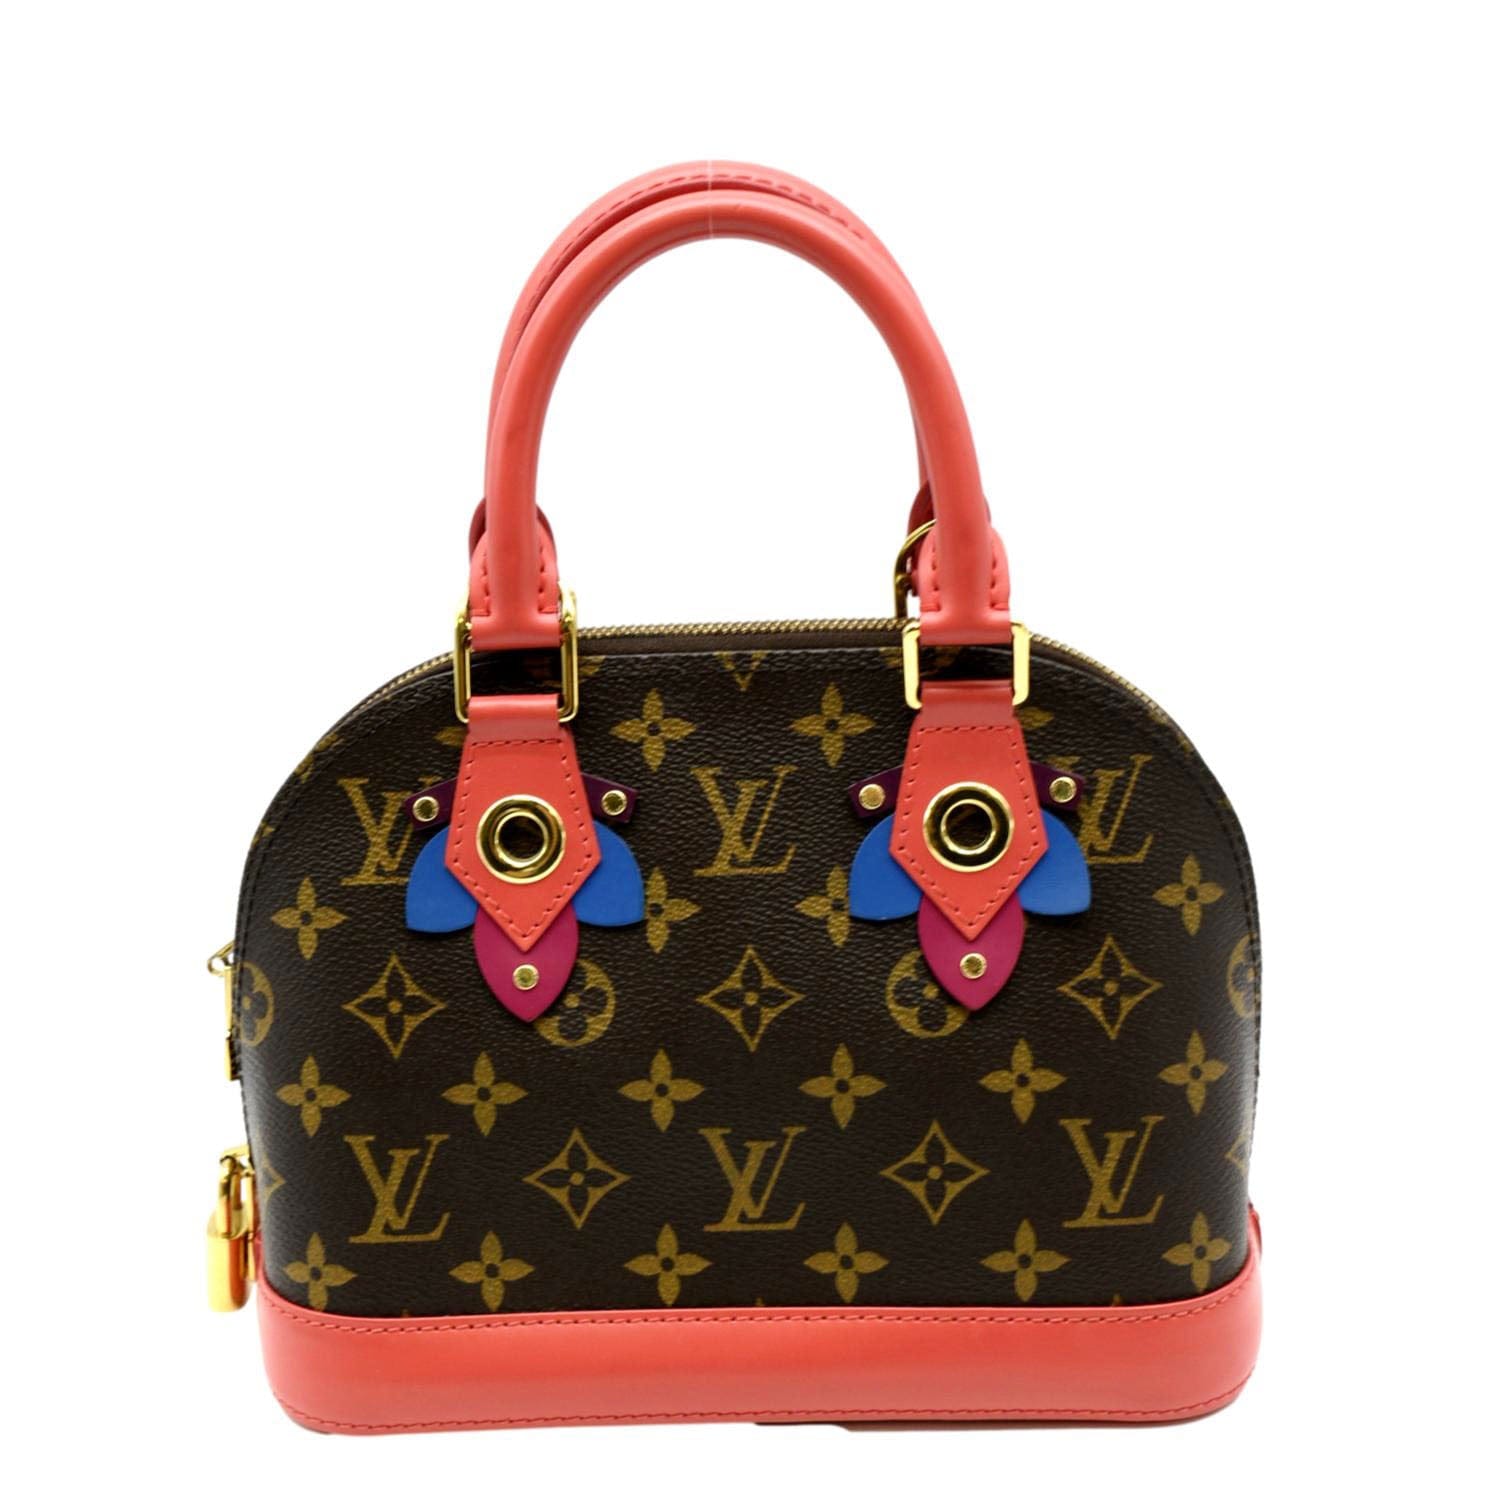 Sell or Trade Louis Vuitton alma bb in hot pink